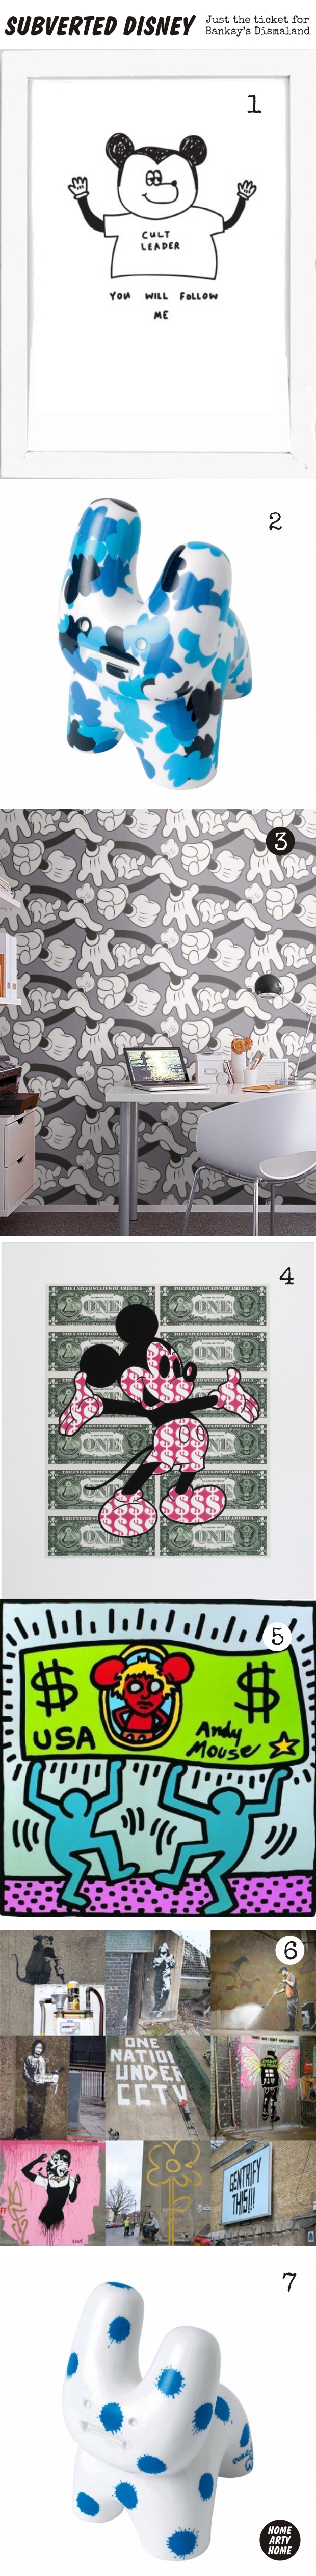 Subverted_Disney_homeartyhome